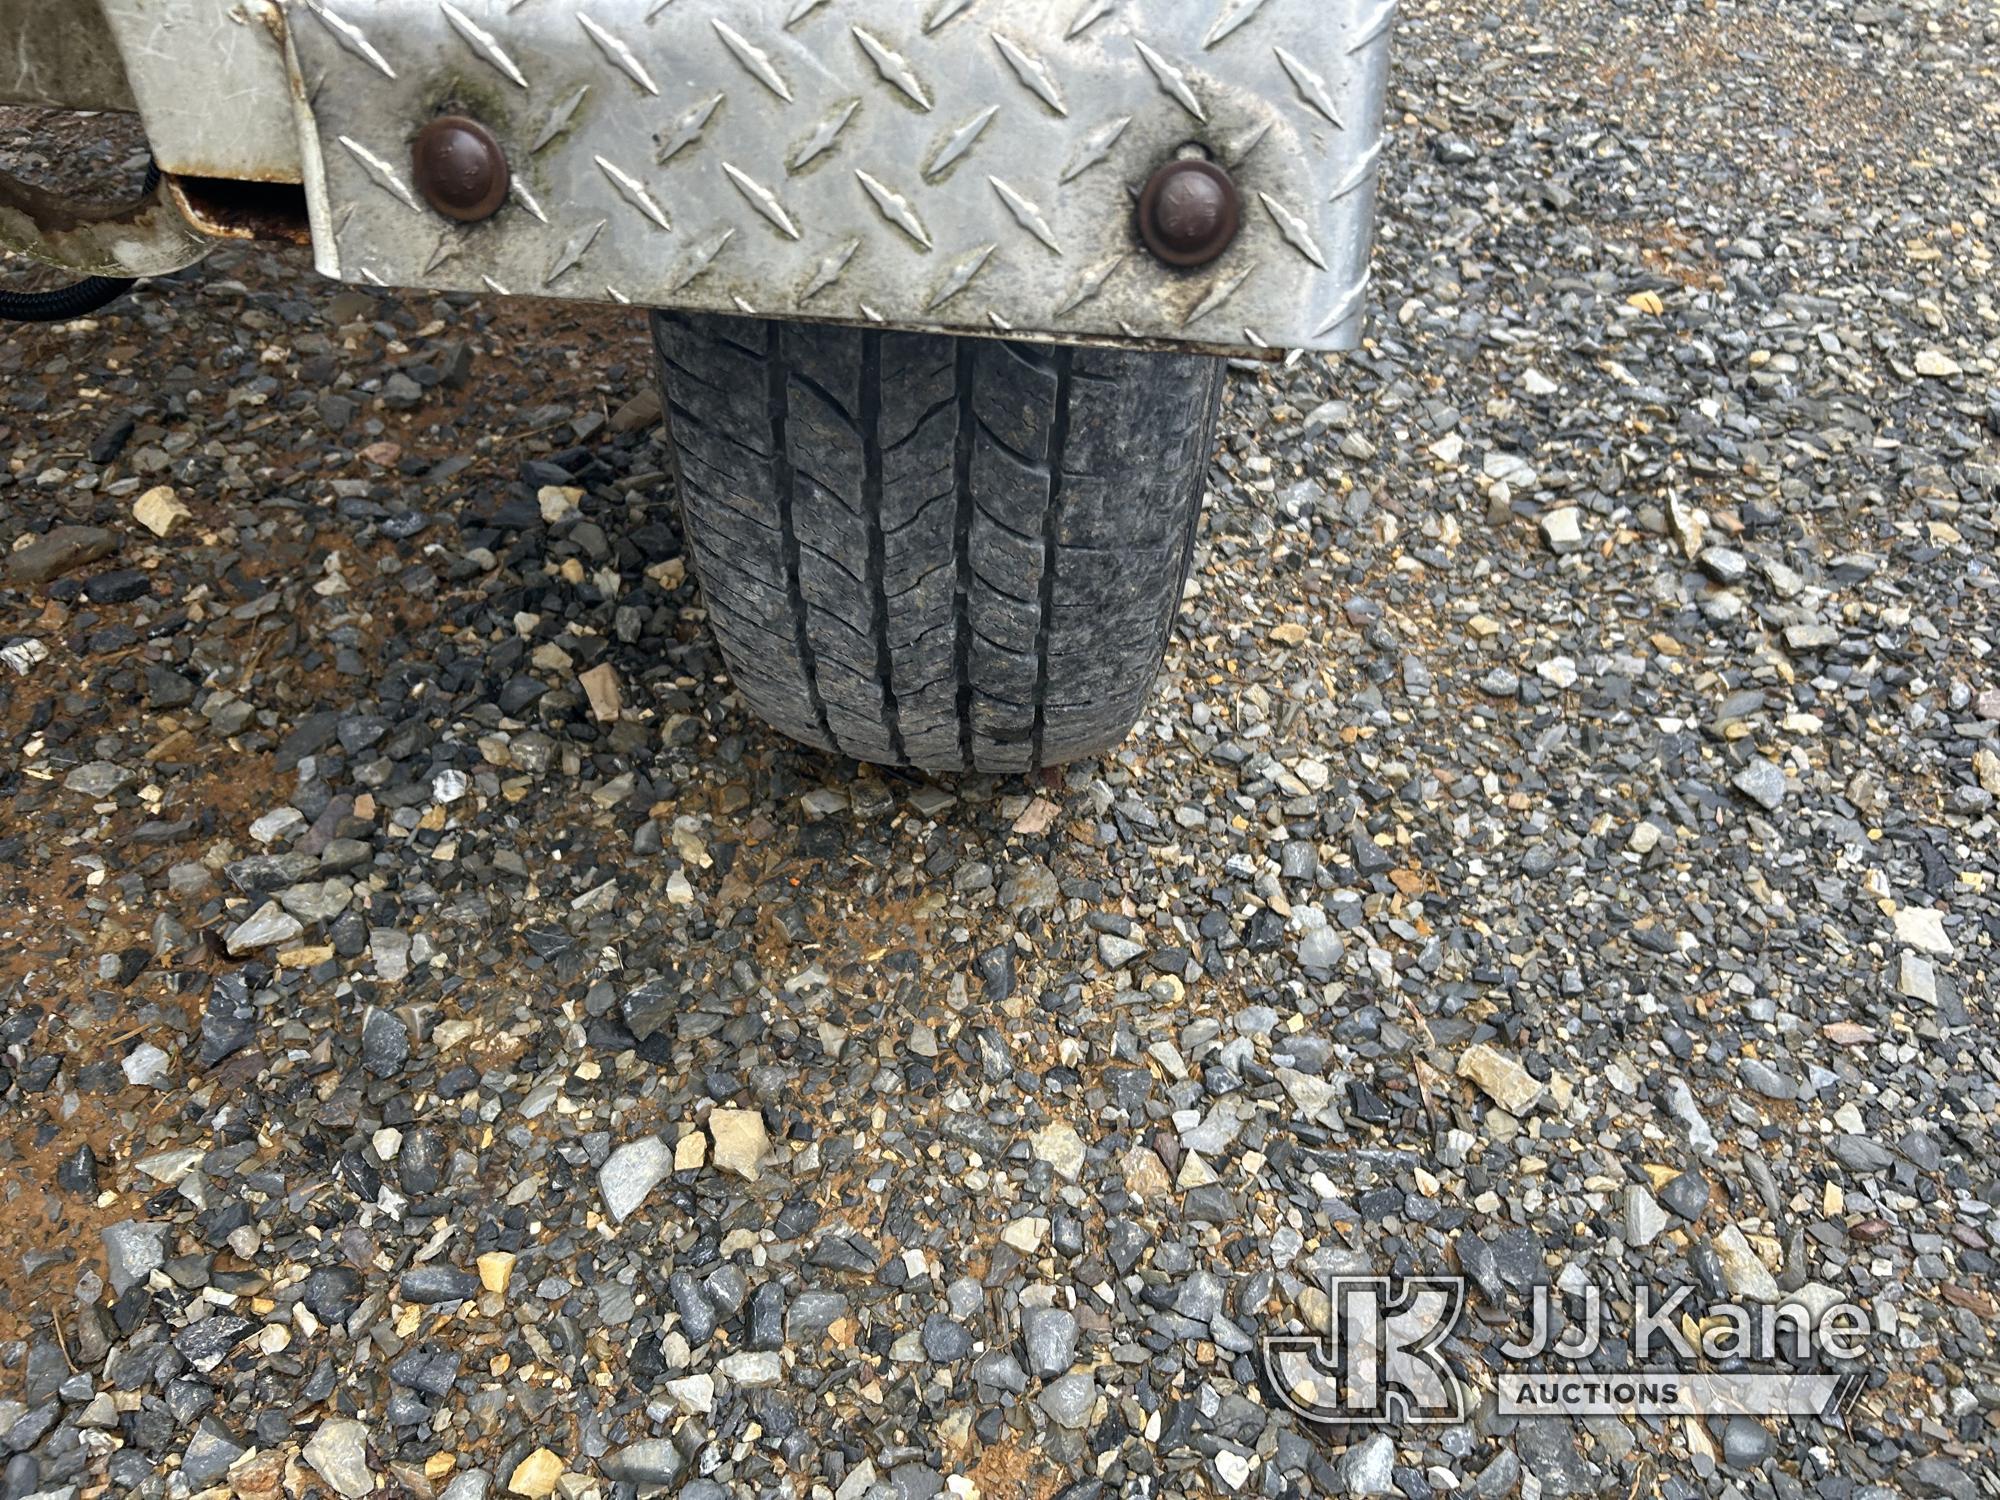 (Hagerstown, MD) 2014 Bandit 200+XP Chipper (12in Disc) Runs, Chipper Does Not Operate Condition Unk